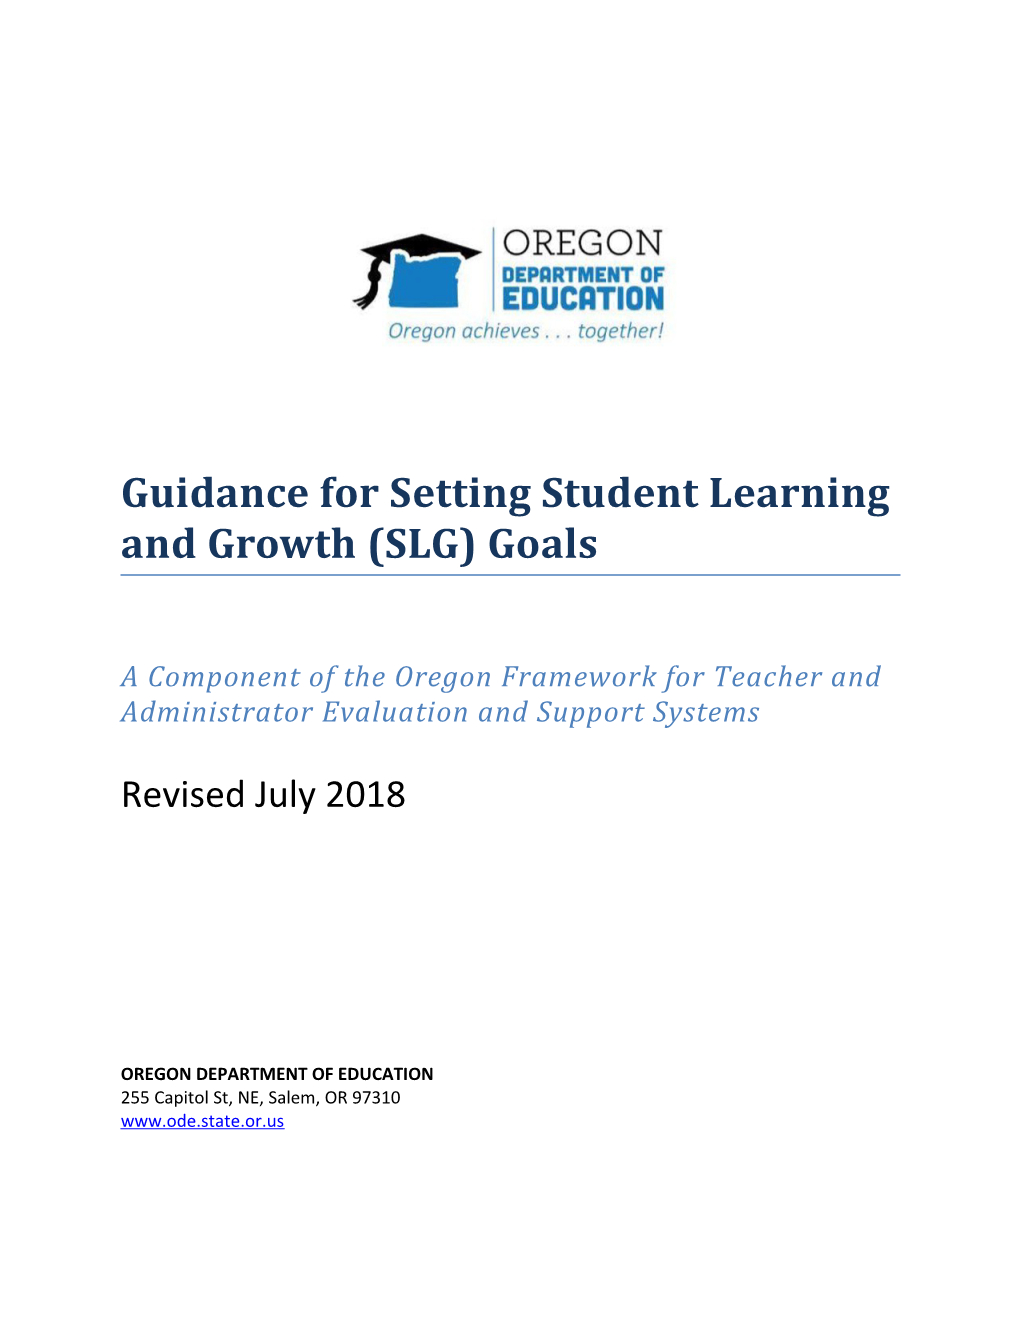 Guidance for Setting Student Learning and Growth (SLG) Goals